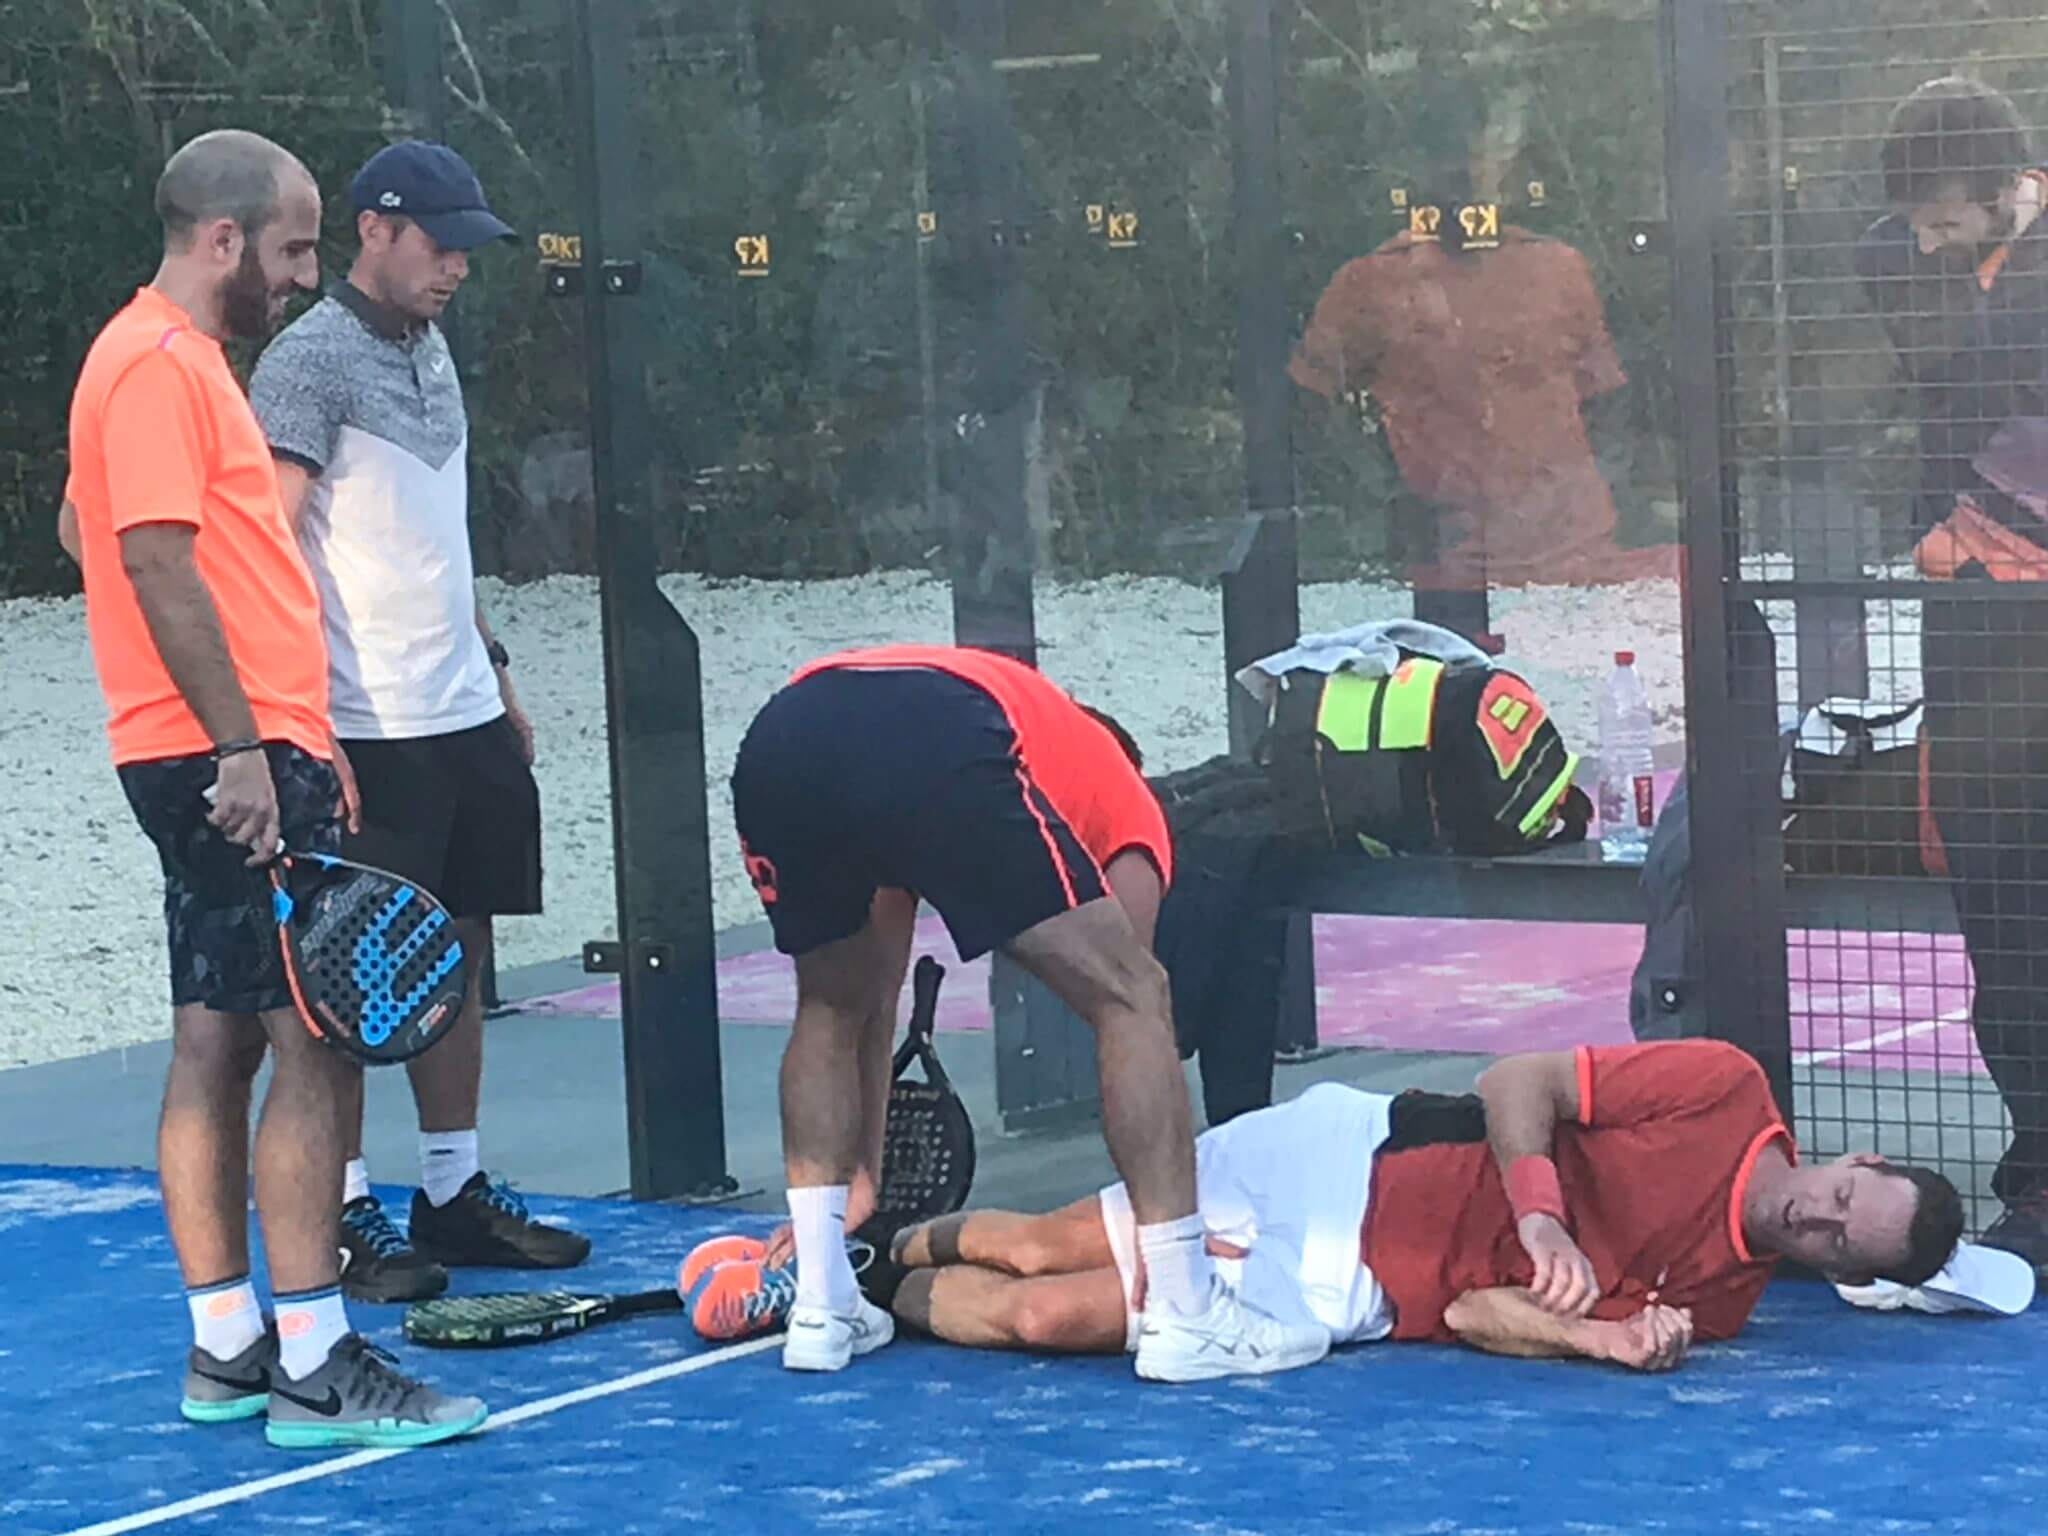 The resumption of padel after an injury